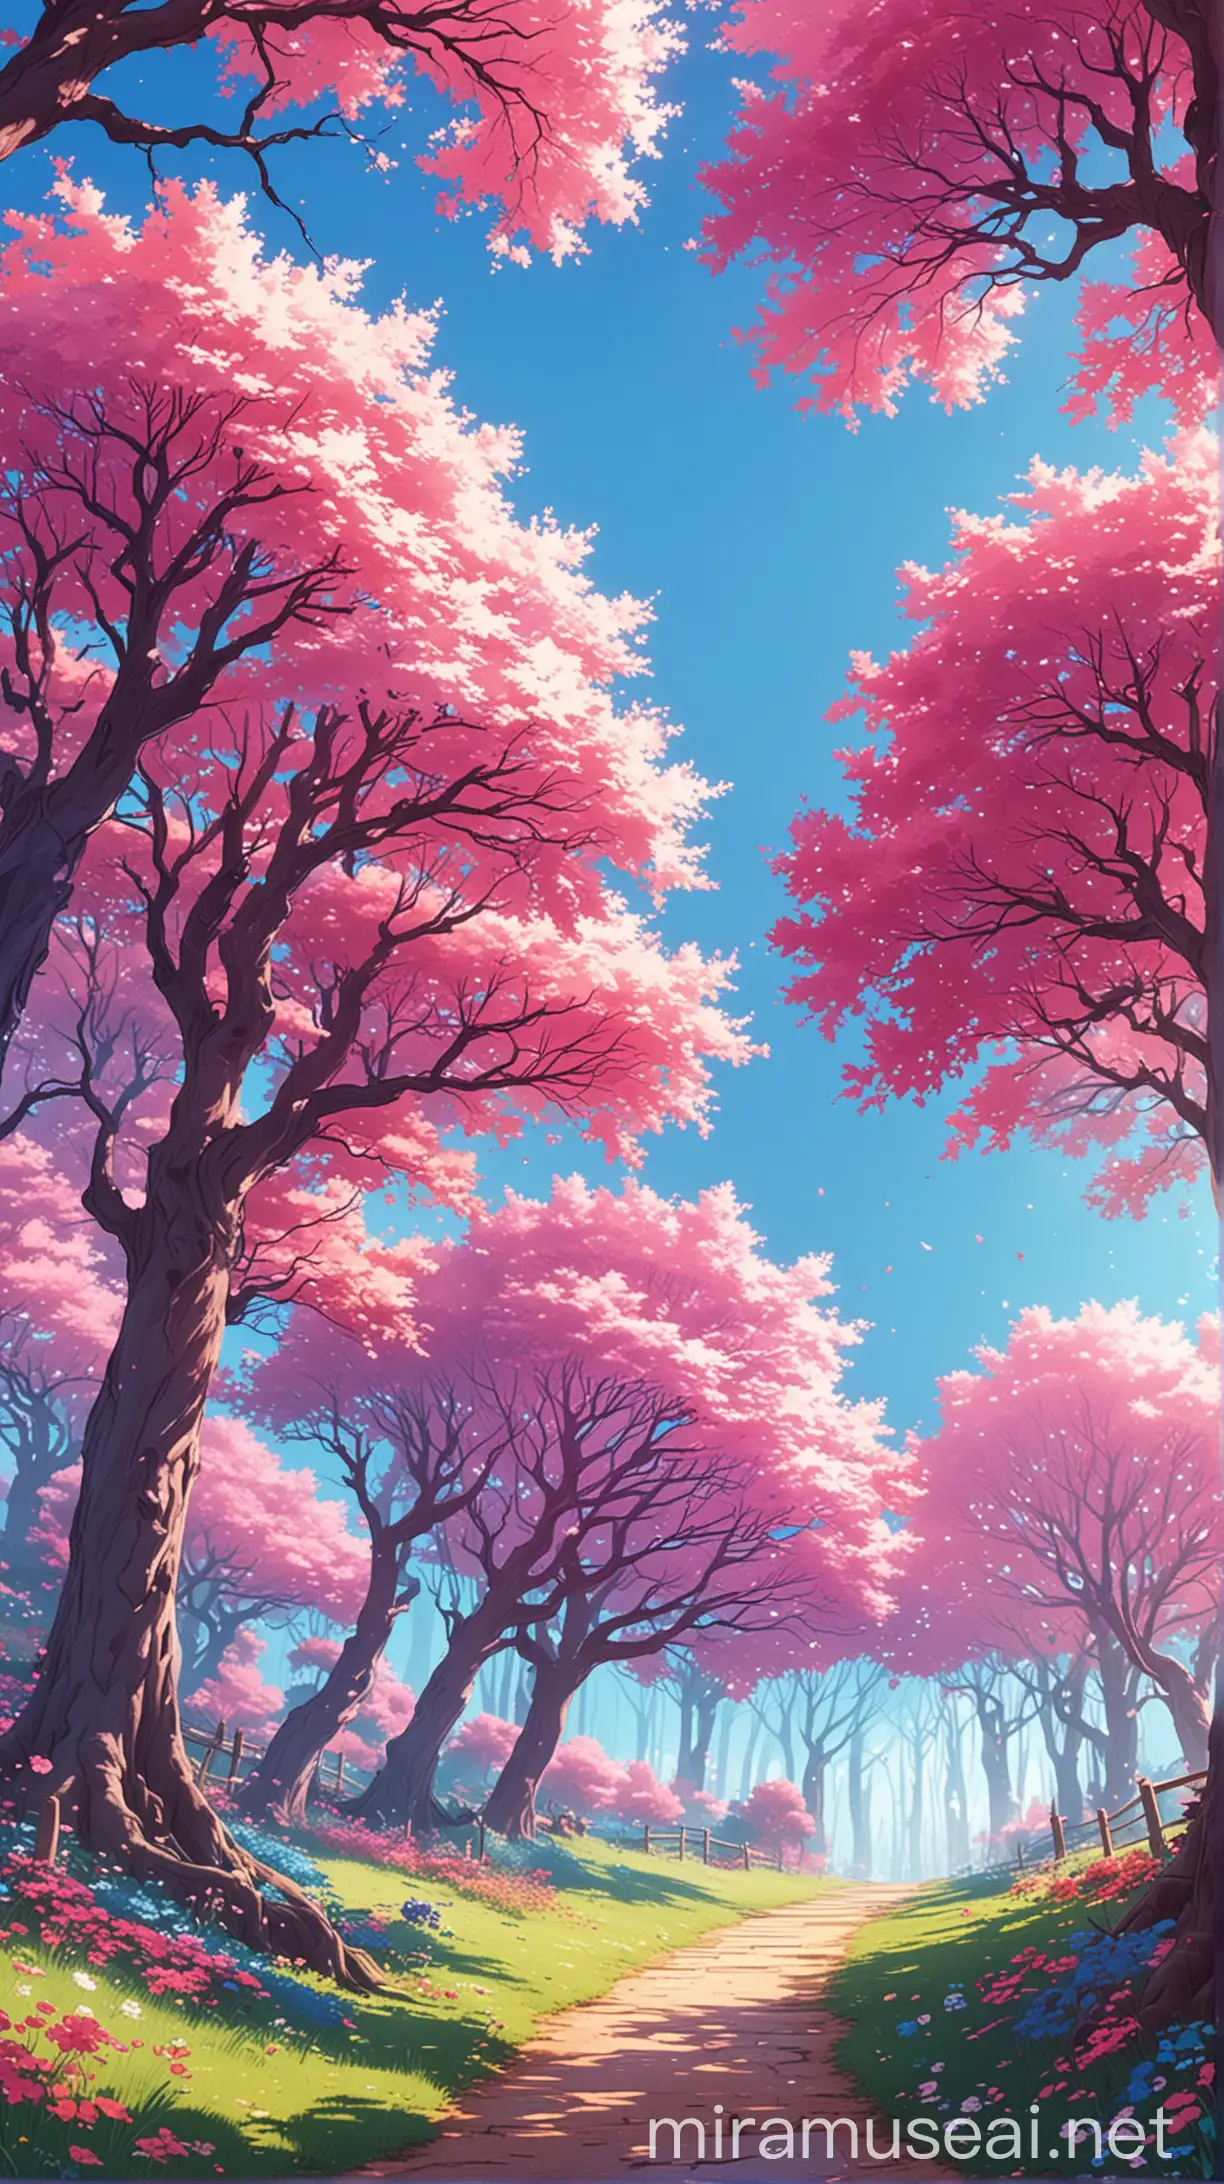 Magical Anime Forest with Cute Kawaii Characters and Vibrant Colors